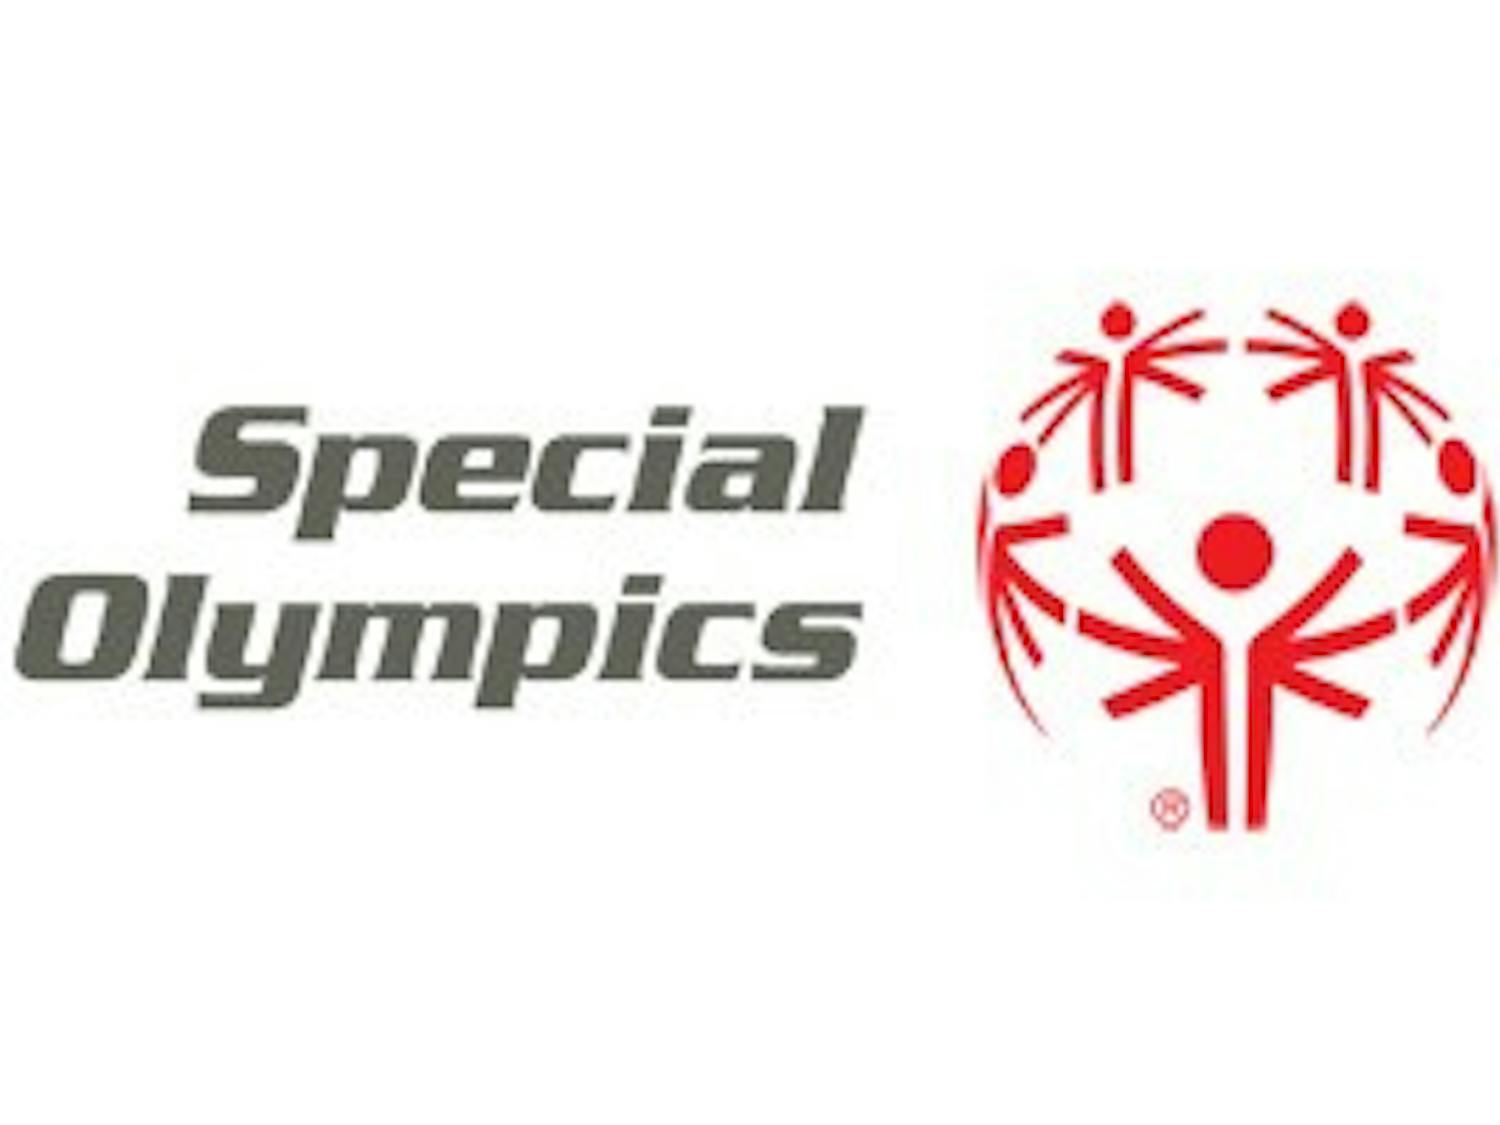 The 2019 Special Olympics Summer World Games will be held in Abu Dhabi, the capitol city of the United Arab Emirates. 